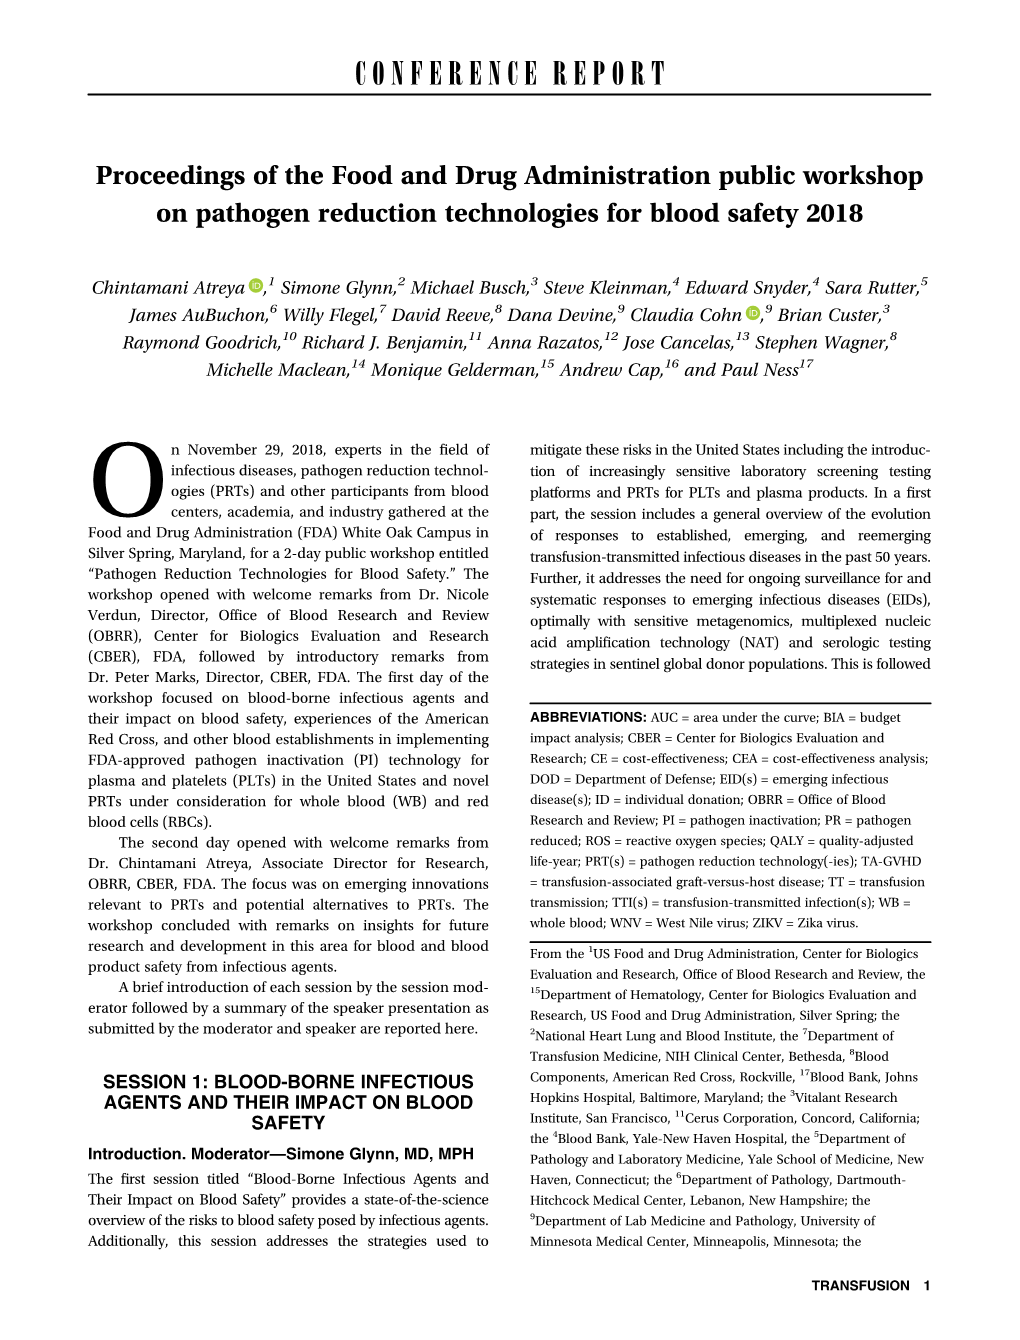 Proceedings of the Food and Drug Administration Public Workshop on Pathogen Reduction Technologies for Blood Safety 2018